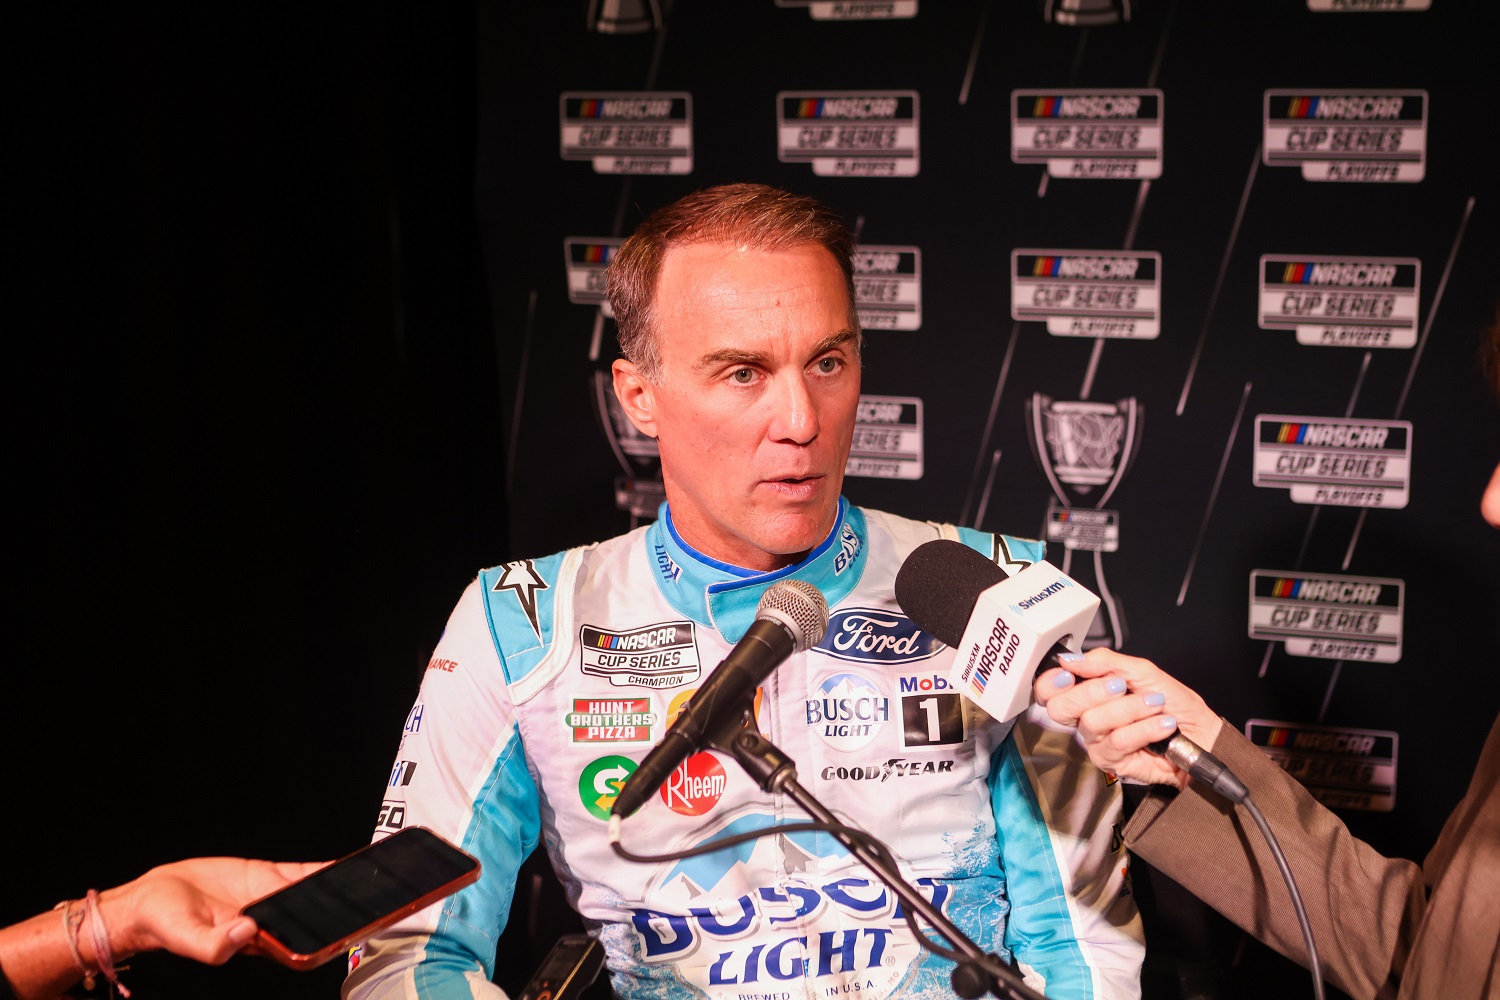 Kevin Harvick speaks to reporters during the 2022 NASCAR Cup Series Playoff Media Day on Sept. 1, 2022, at the Charlotte Convention Center. | David Jensen/Icon Sportswire via Getty Images